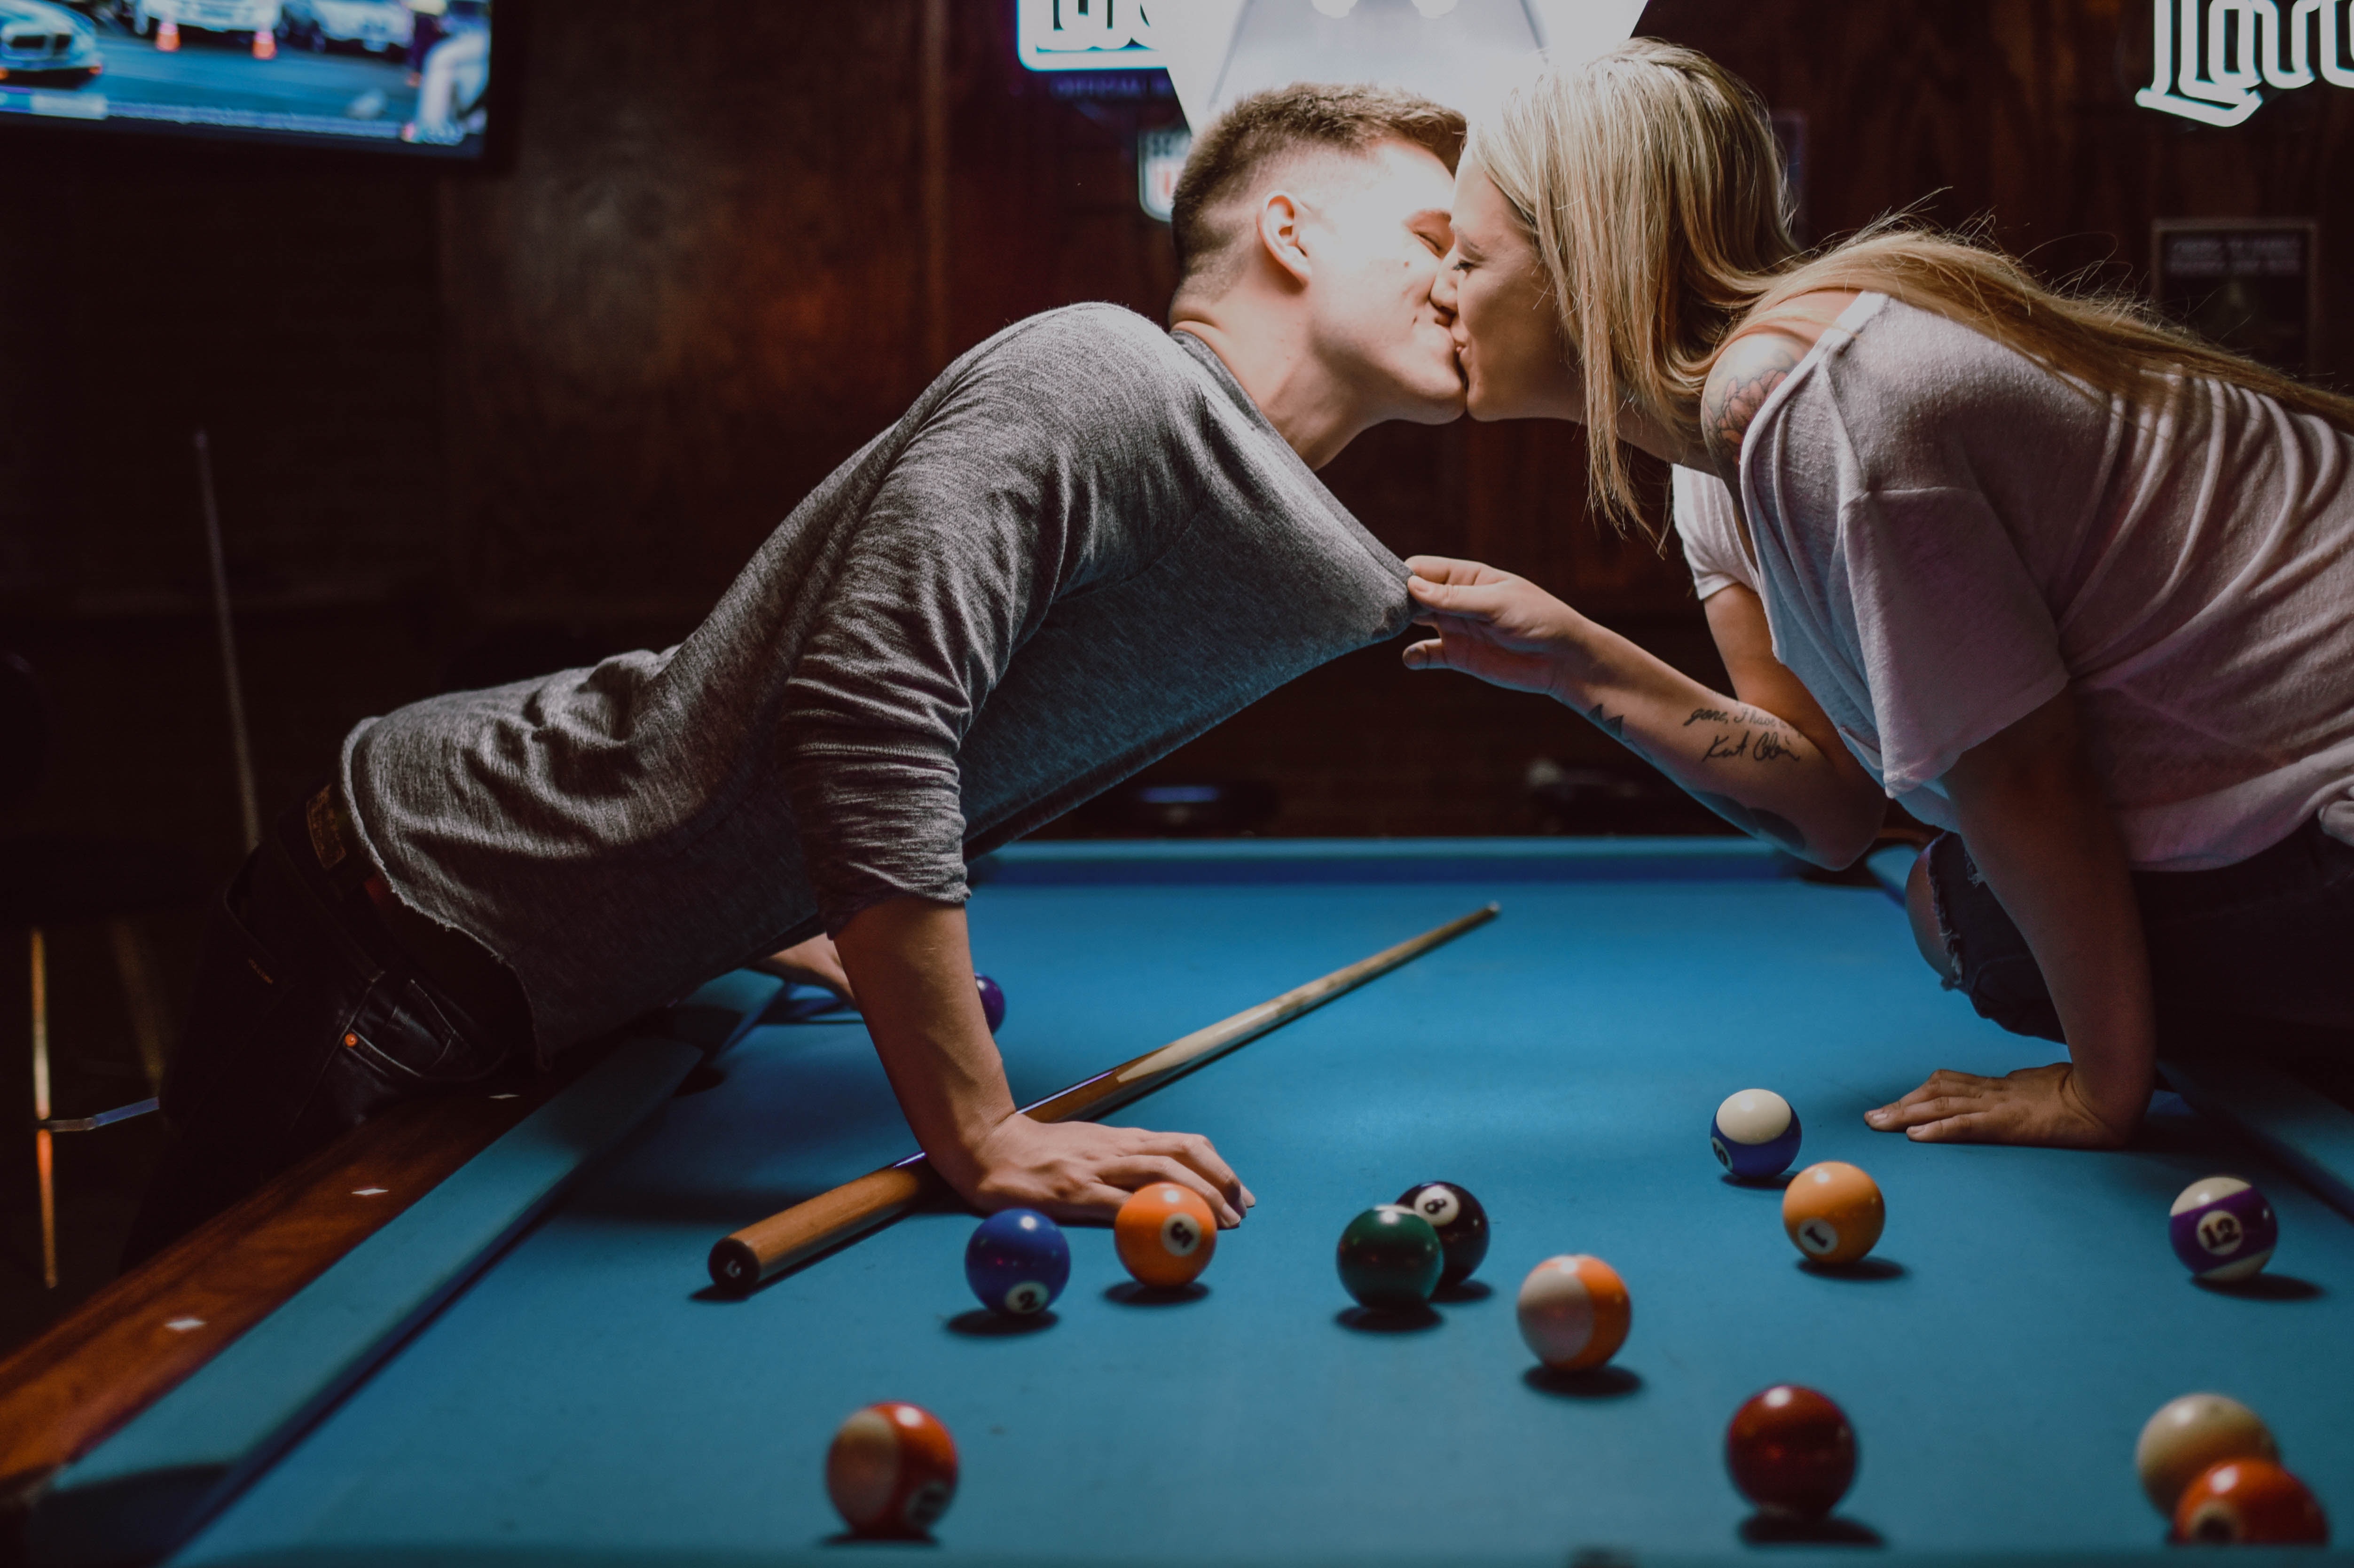 103590 download wallpaper love, billiards, couple, pair, tenderness, kiss screensavers and pictures for free